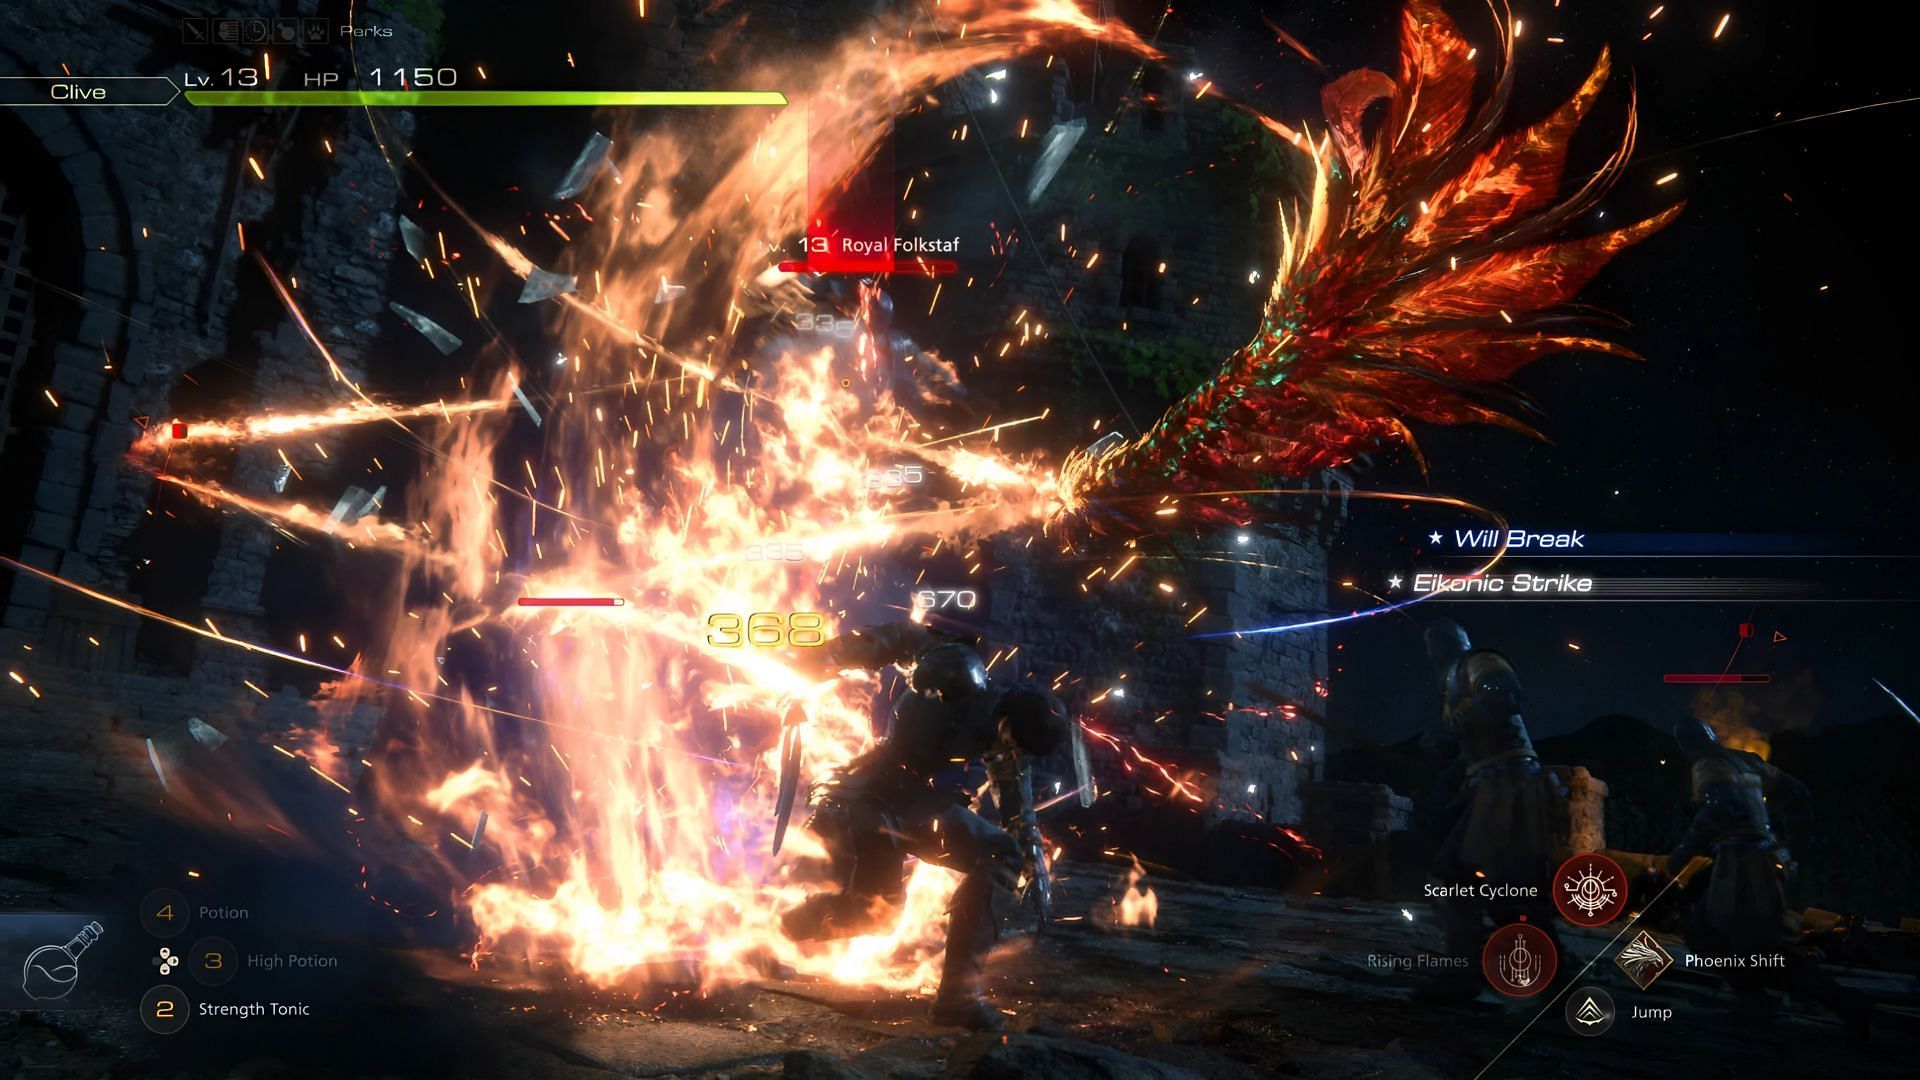 With the Phoenix ability, you can unleash fiery assaults on your enemies (Image via Square Enix)